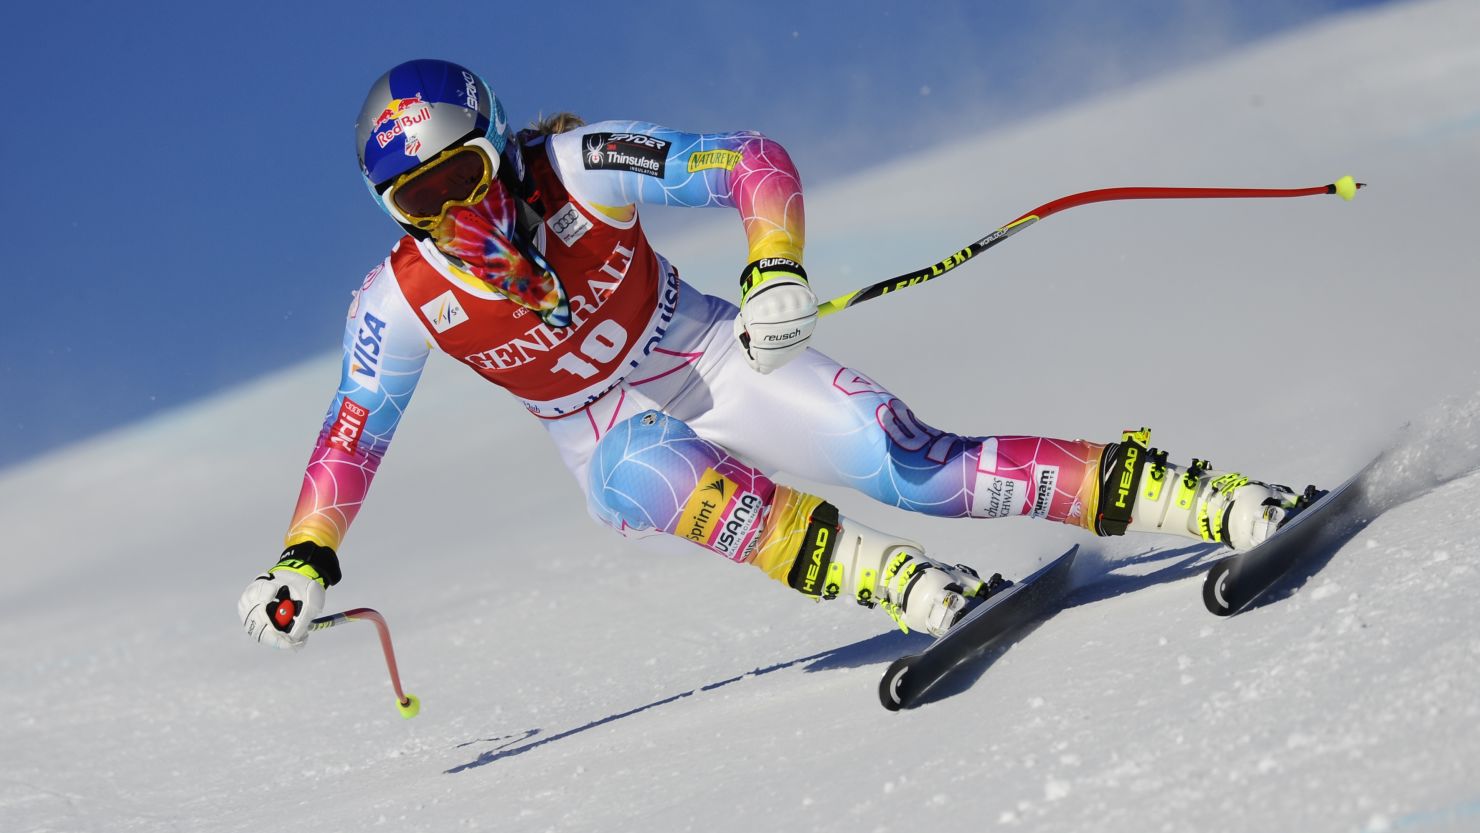 Lindsey Vonn safely negotiated her first run down the Lake Louise course where she has won 14 times.